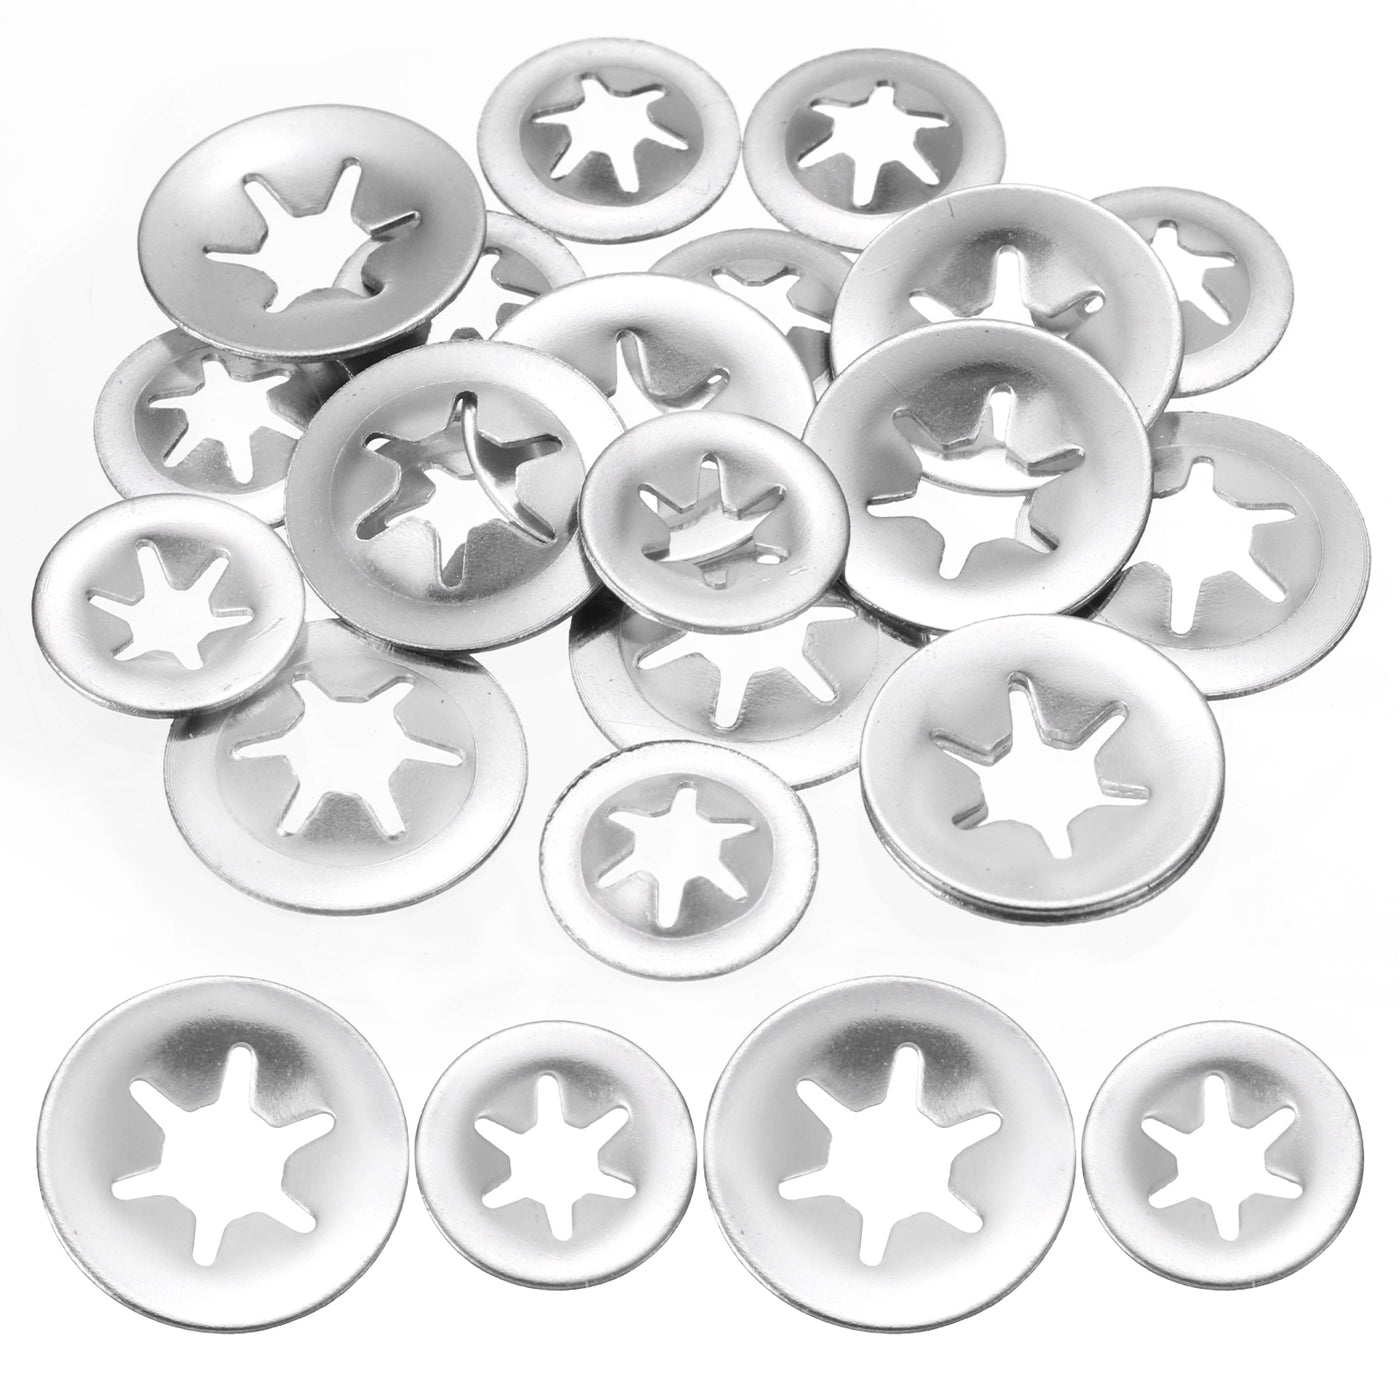 uxcell Uxcell 20pcs Internal Tooth Lock Washers M3 M4 Speed Locking Washers Stainless Steel